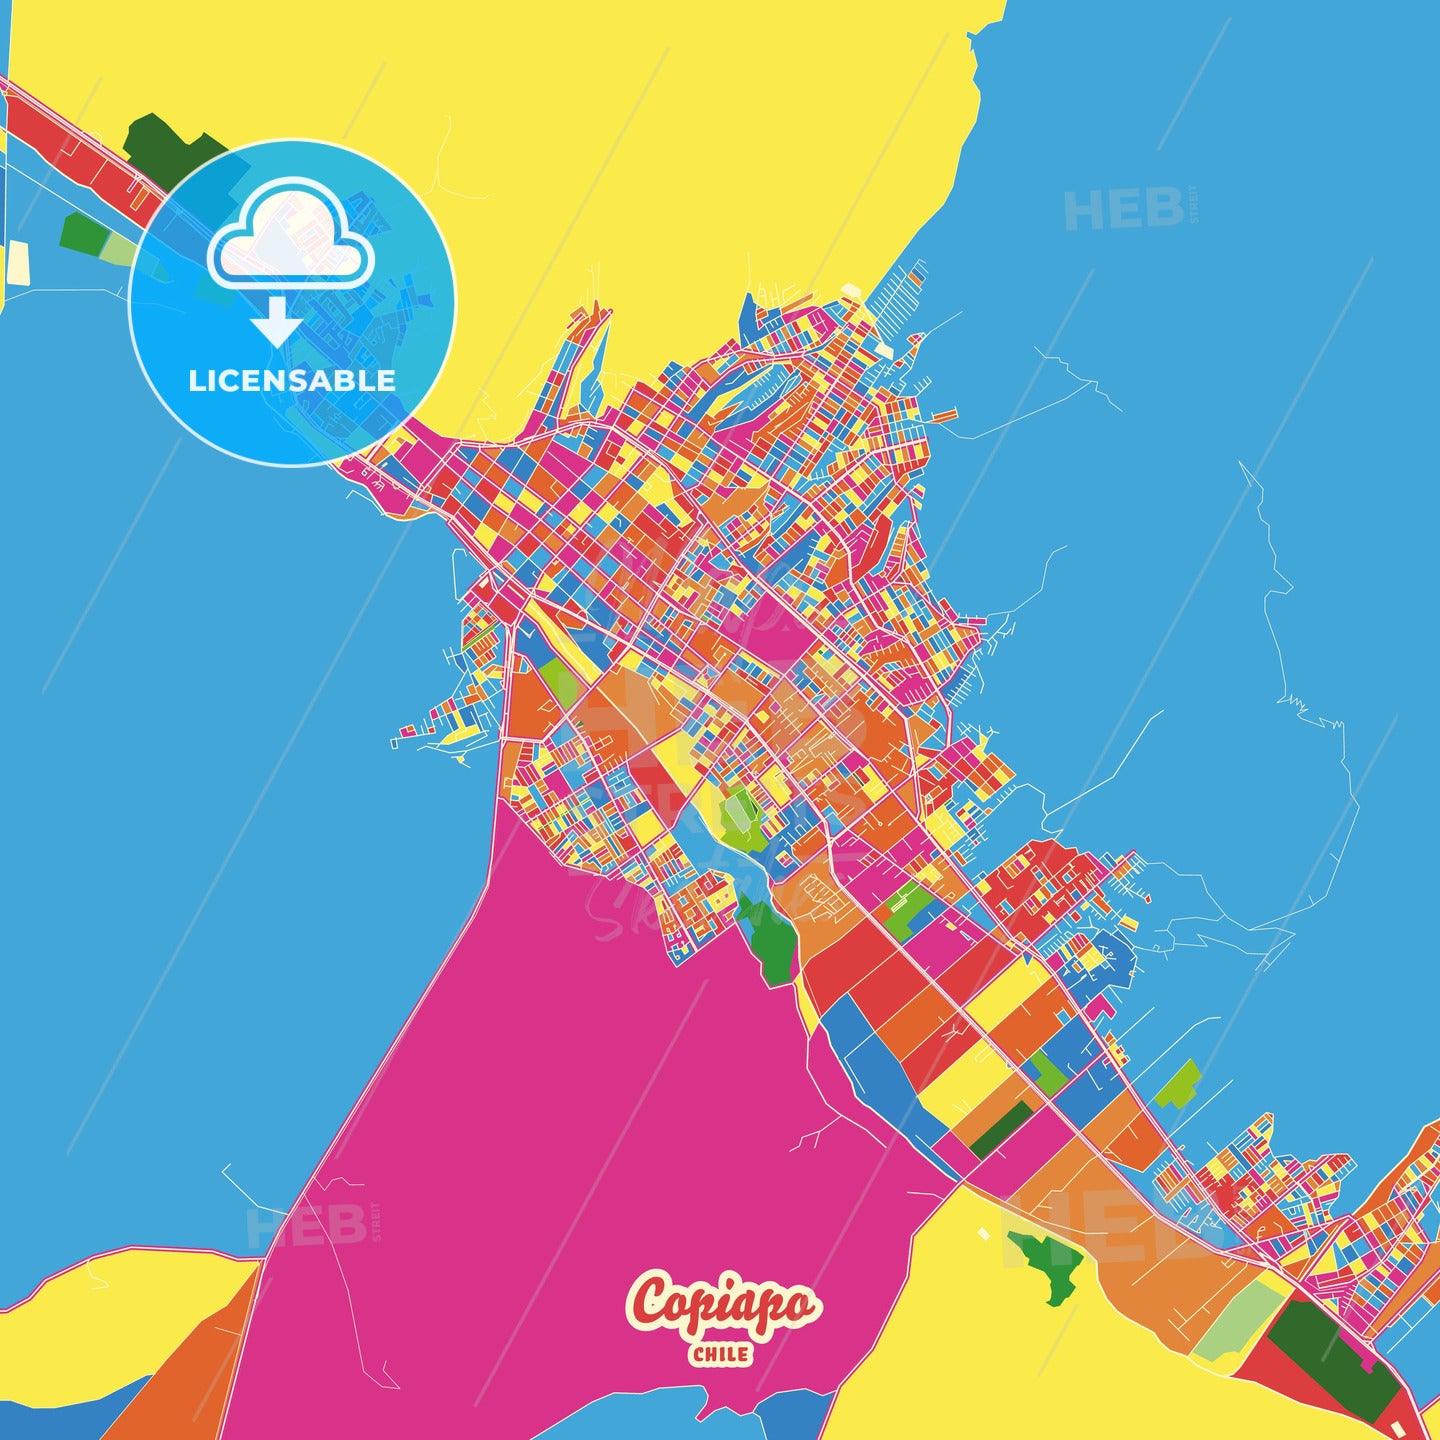 Copiapo, Chile Crazy Colorful Street Map Poster Template - HEBSTREITS Sketches